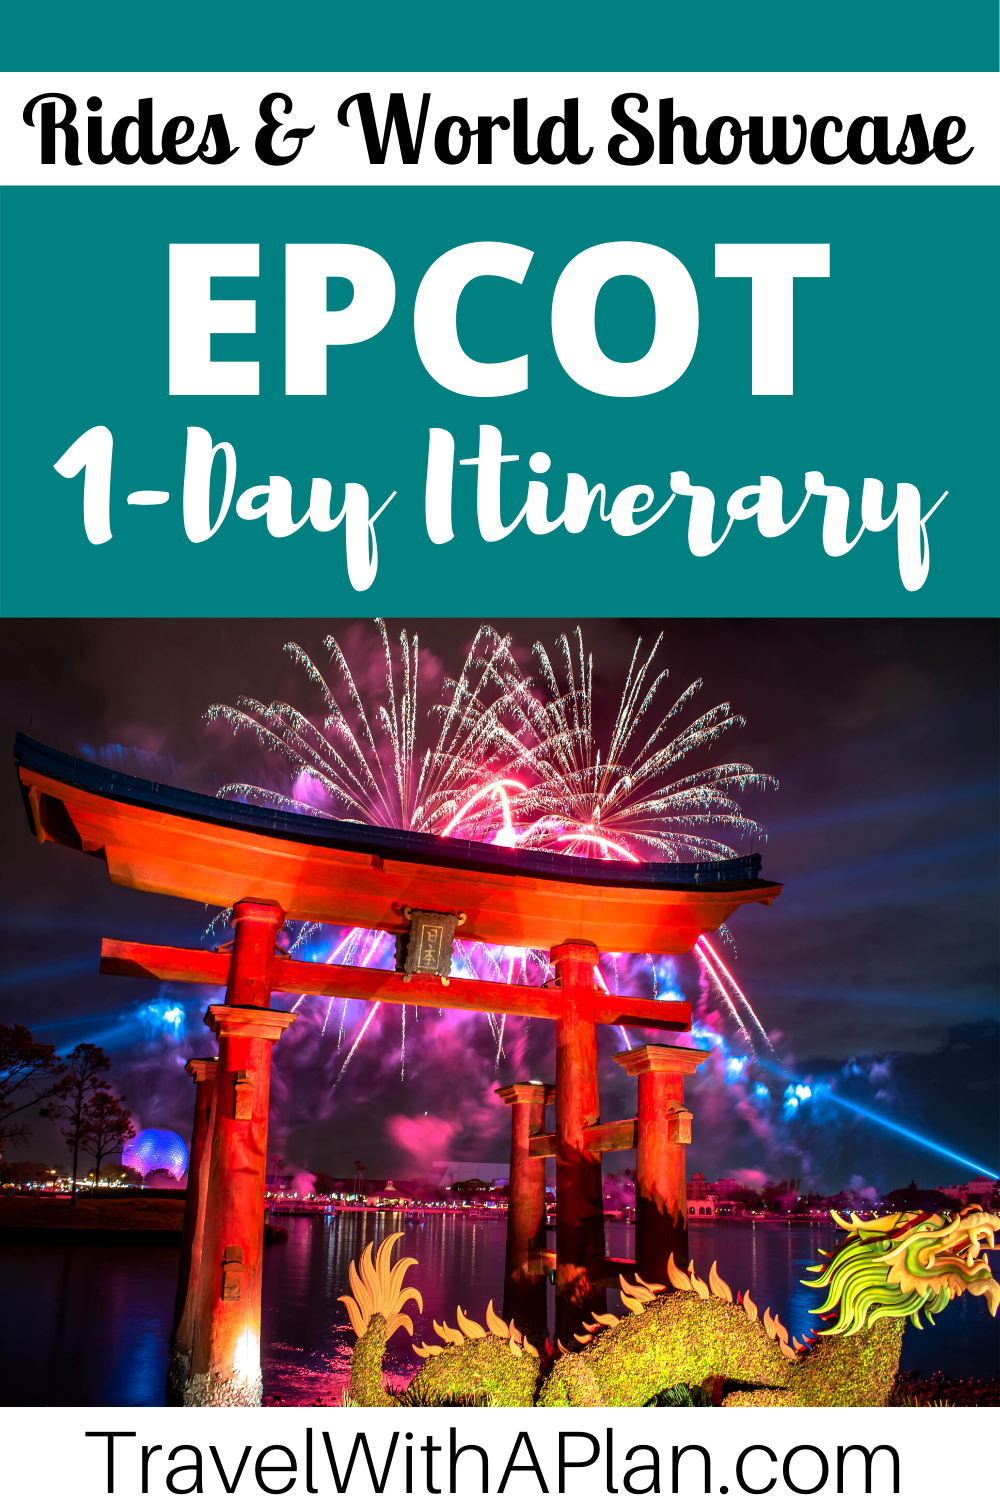 Click here for an epic 1-Day Epcot Touring Plan to help you maximize your time at Epcot, from Top US Family Travel Blog, Travel With A Plan!  #Disney #Epcot